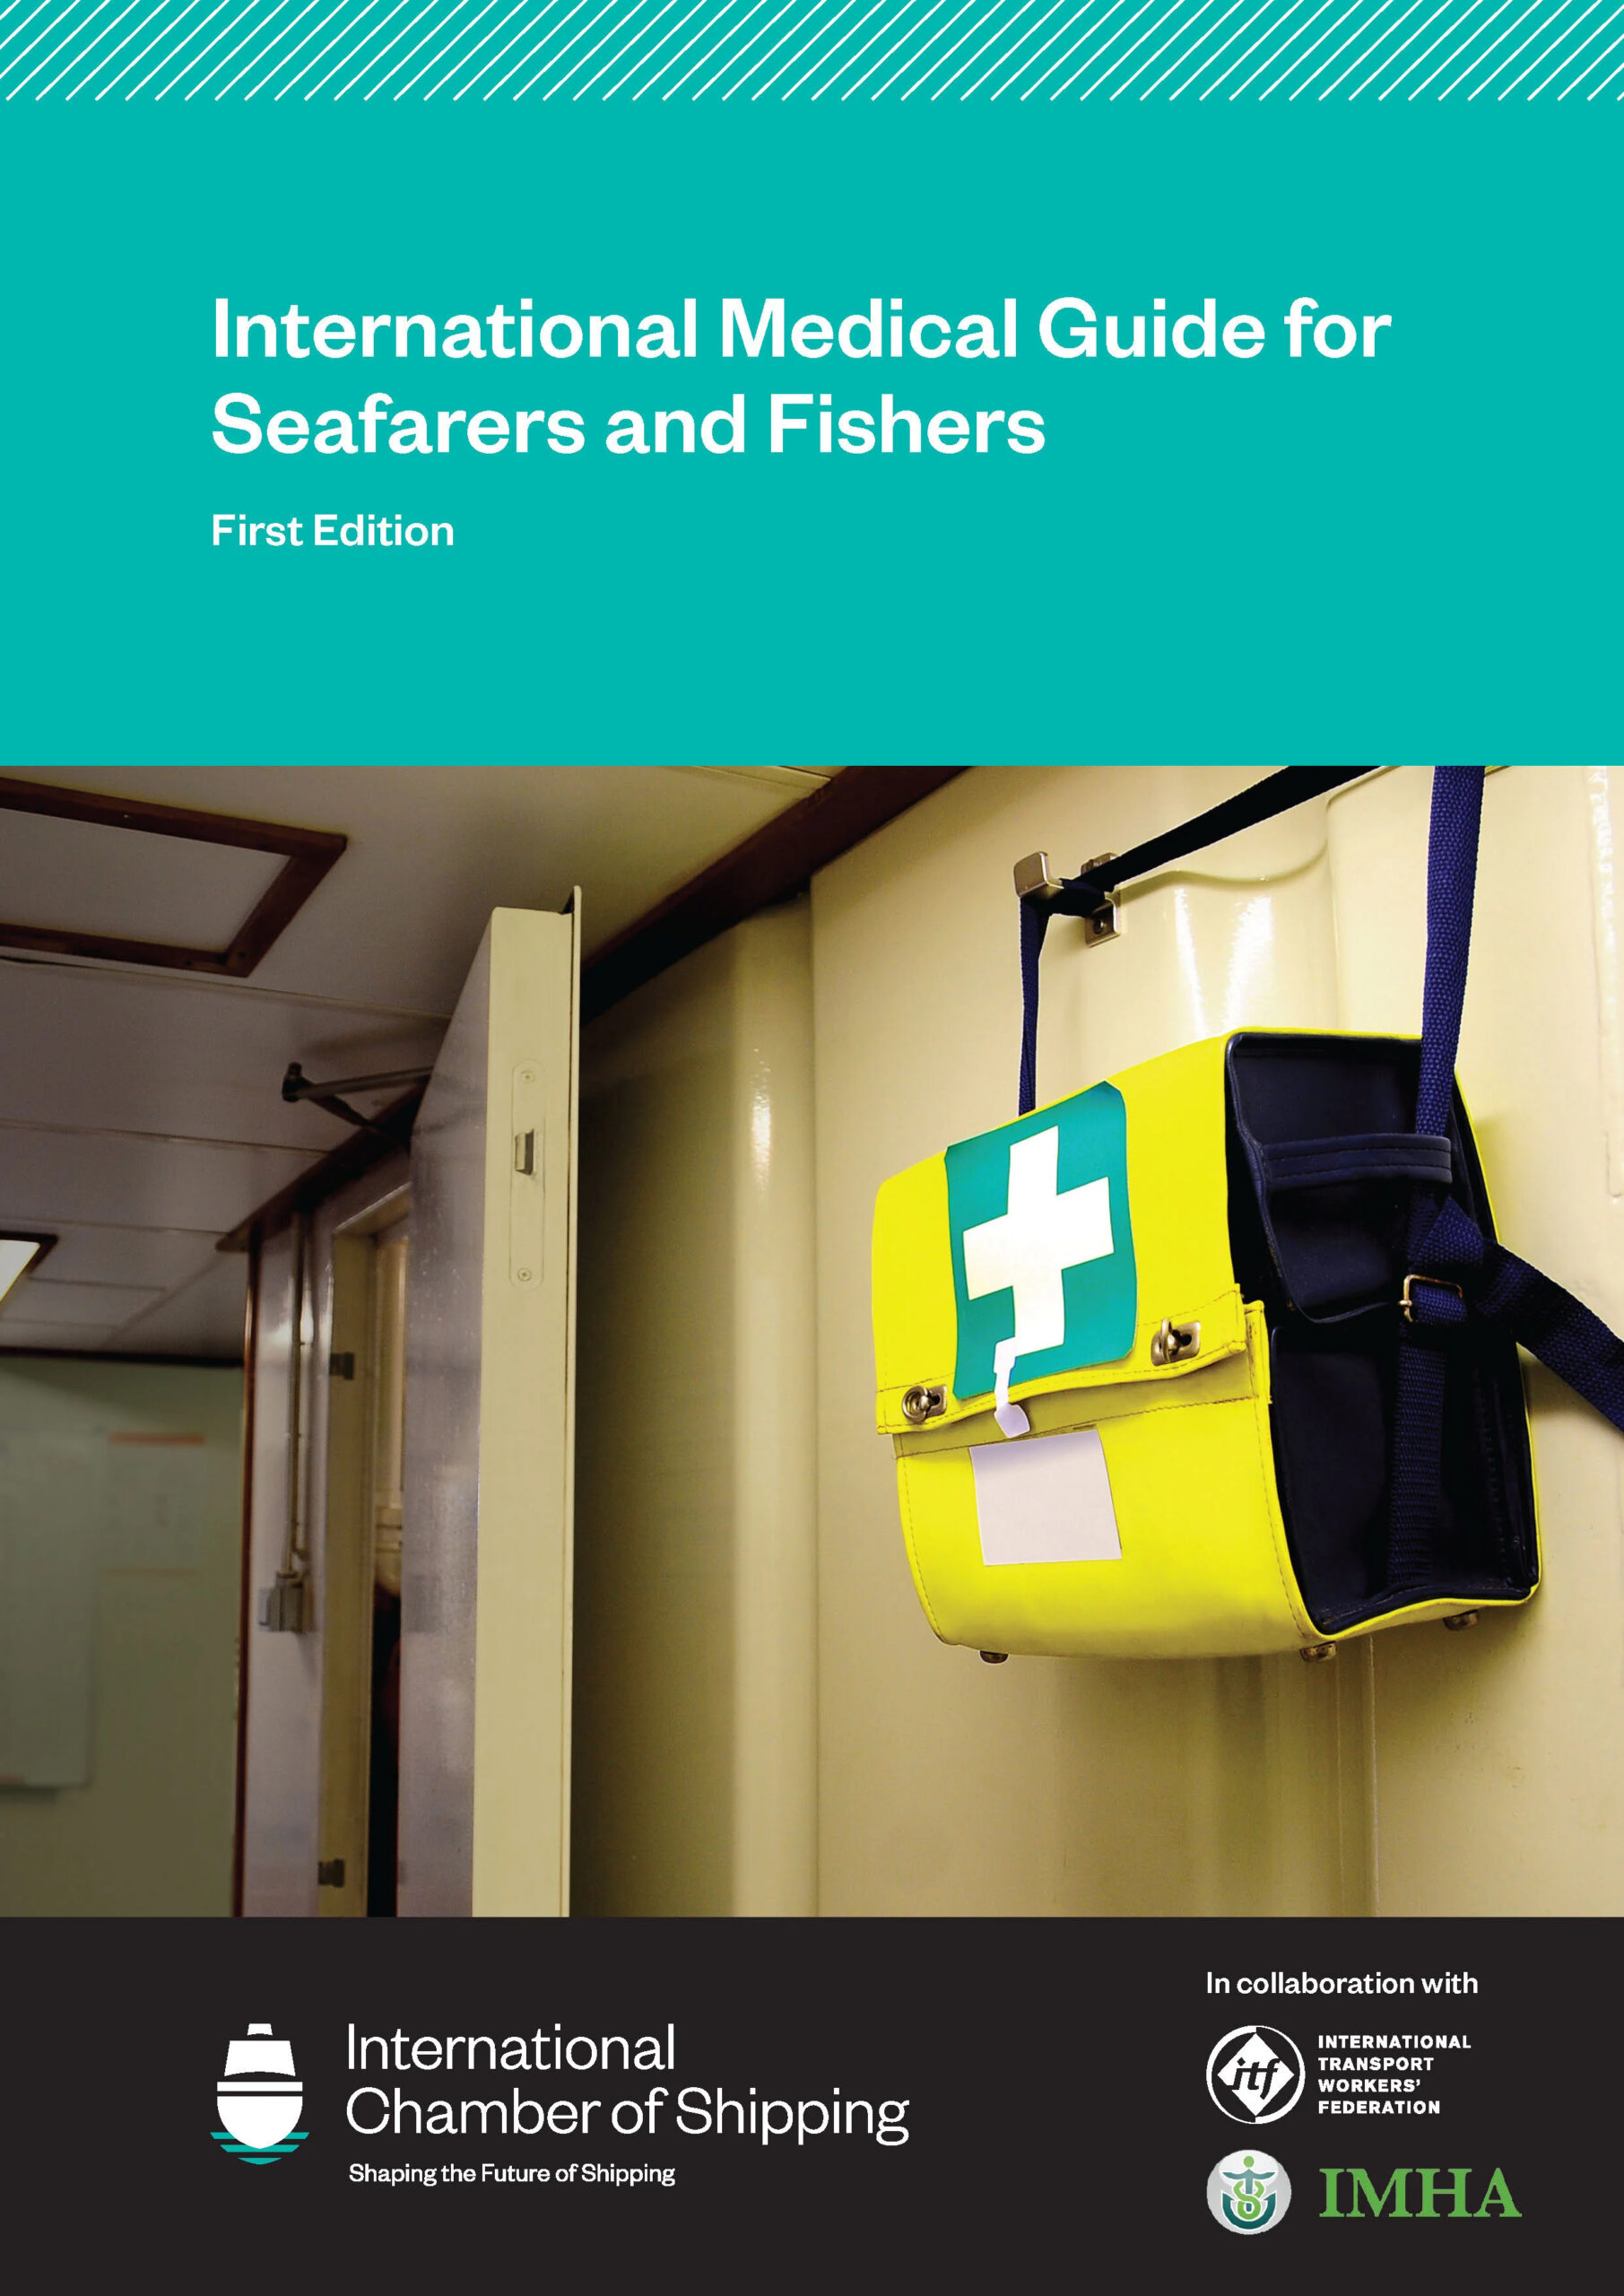 OUT NOW  International Medical Guide for Seafarers and Fishers